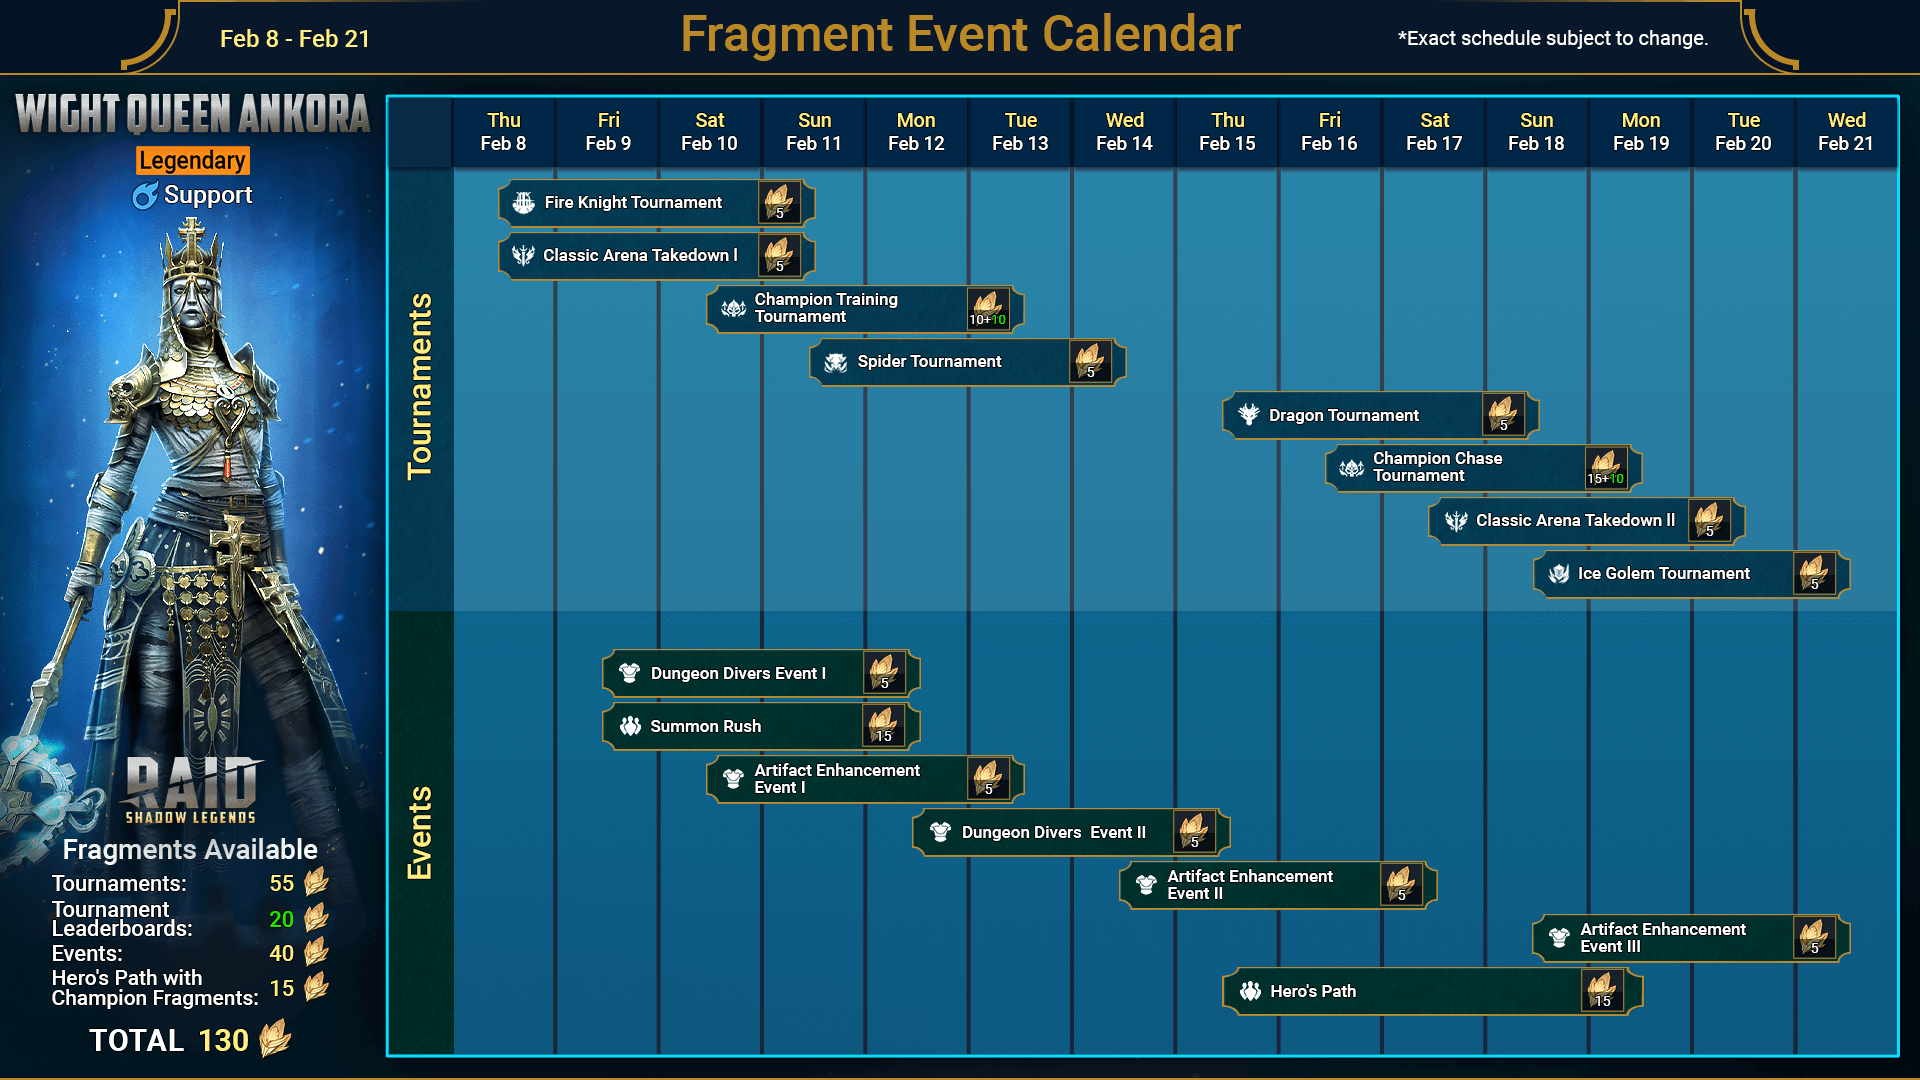 ankora fusion calendar with dates, events and tournament schedule